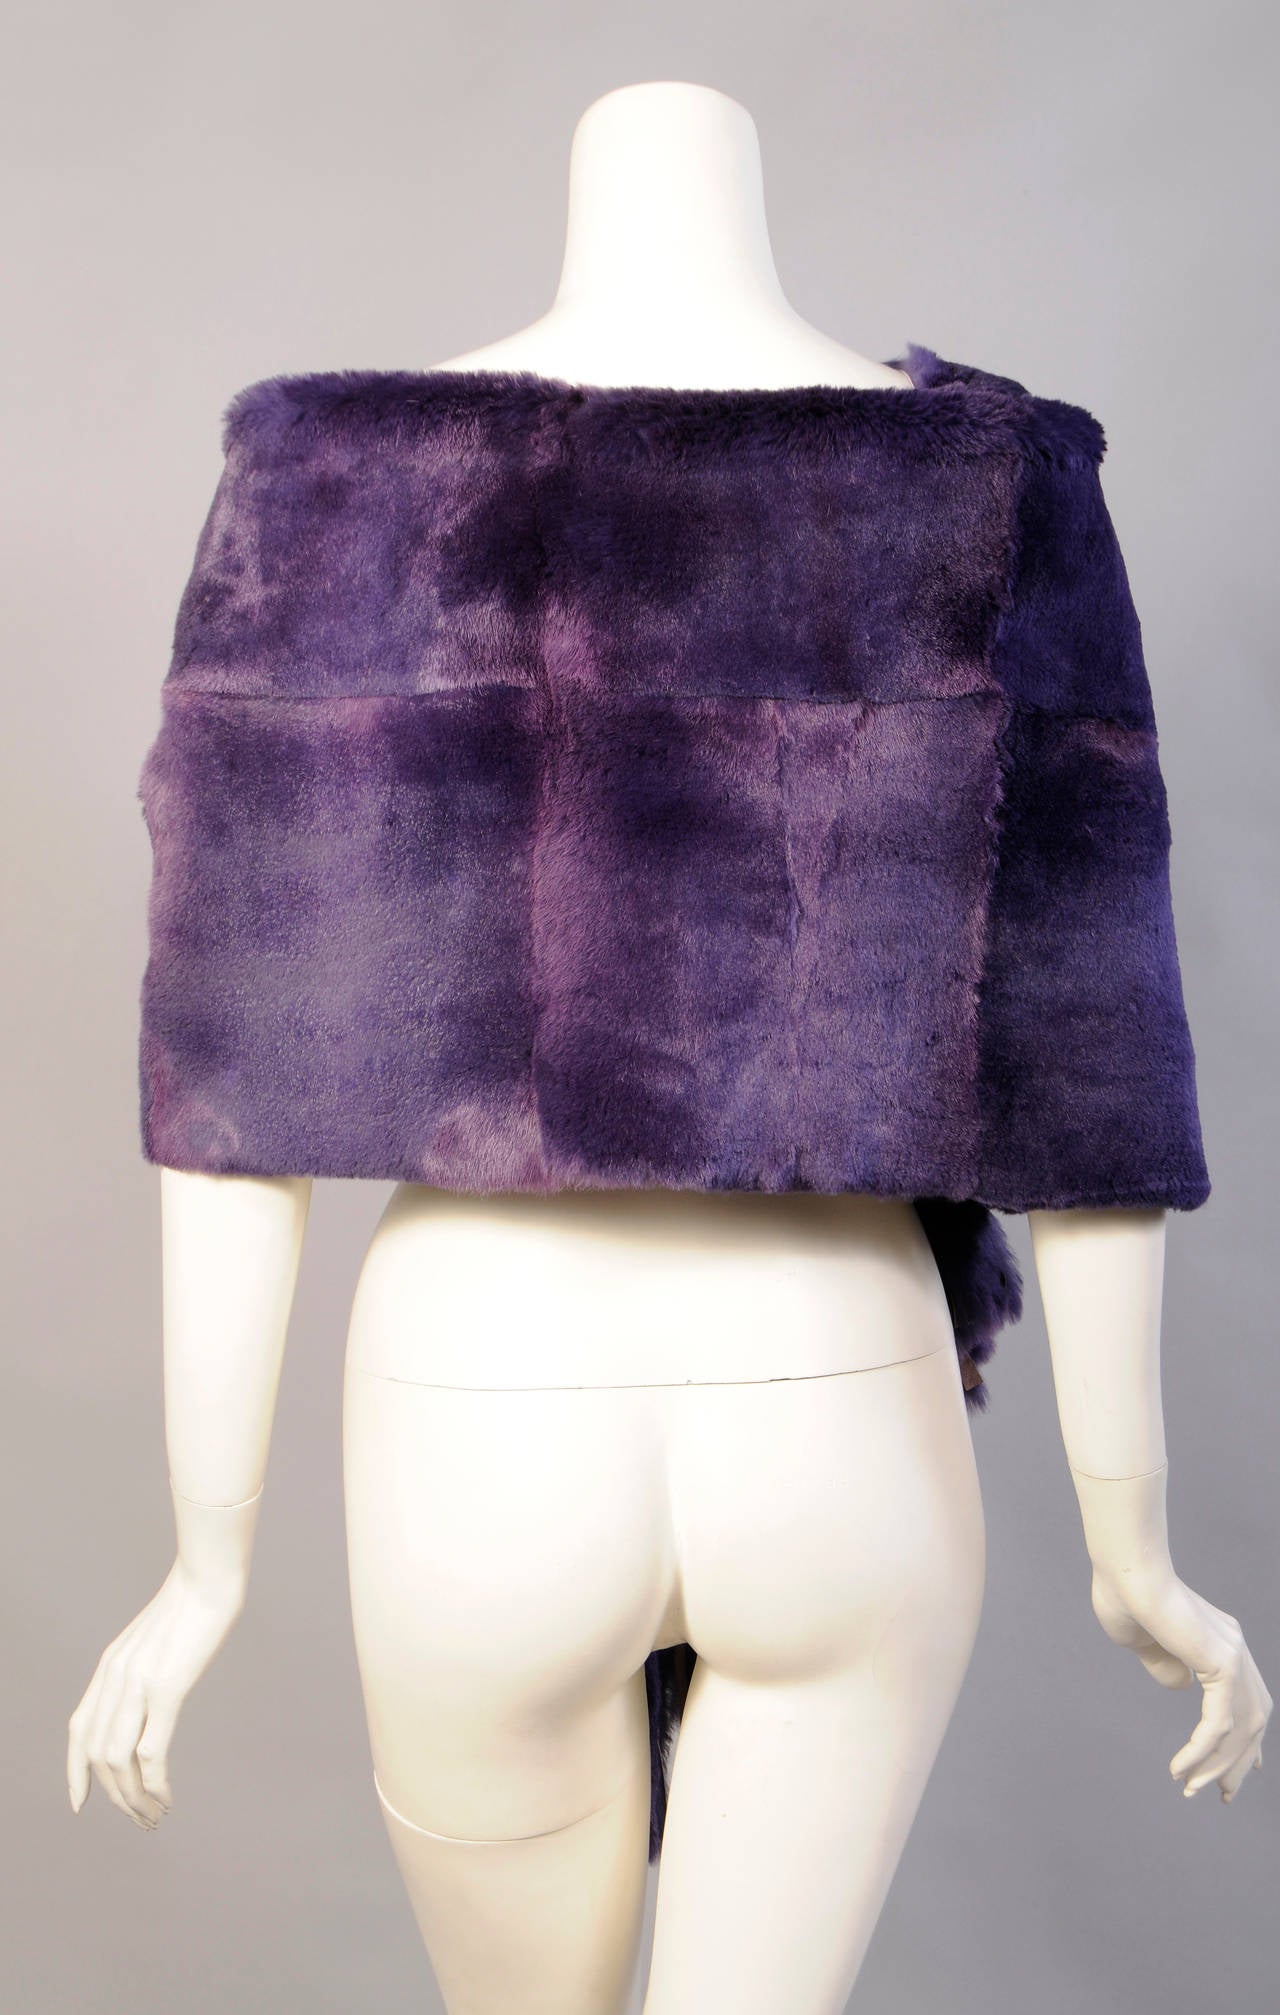 Light weight and luscious this purple shearling wrap from Gianfranco Ferre can be worn in a variety of ways. One side is deep purple shearling and the other side is lavender leather. Both ends have a deep fringe and it is in excellent